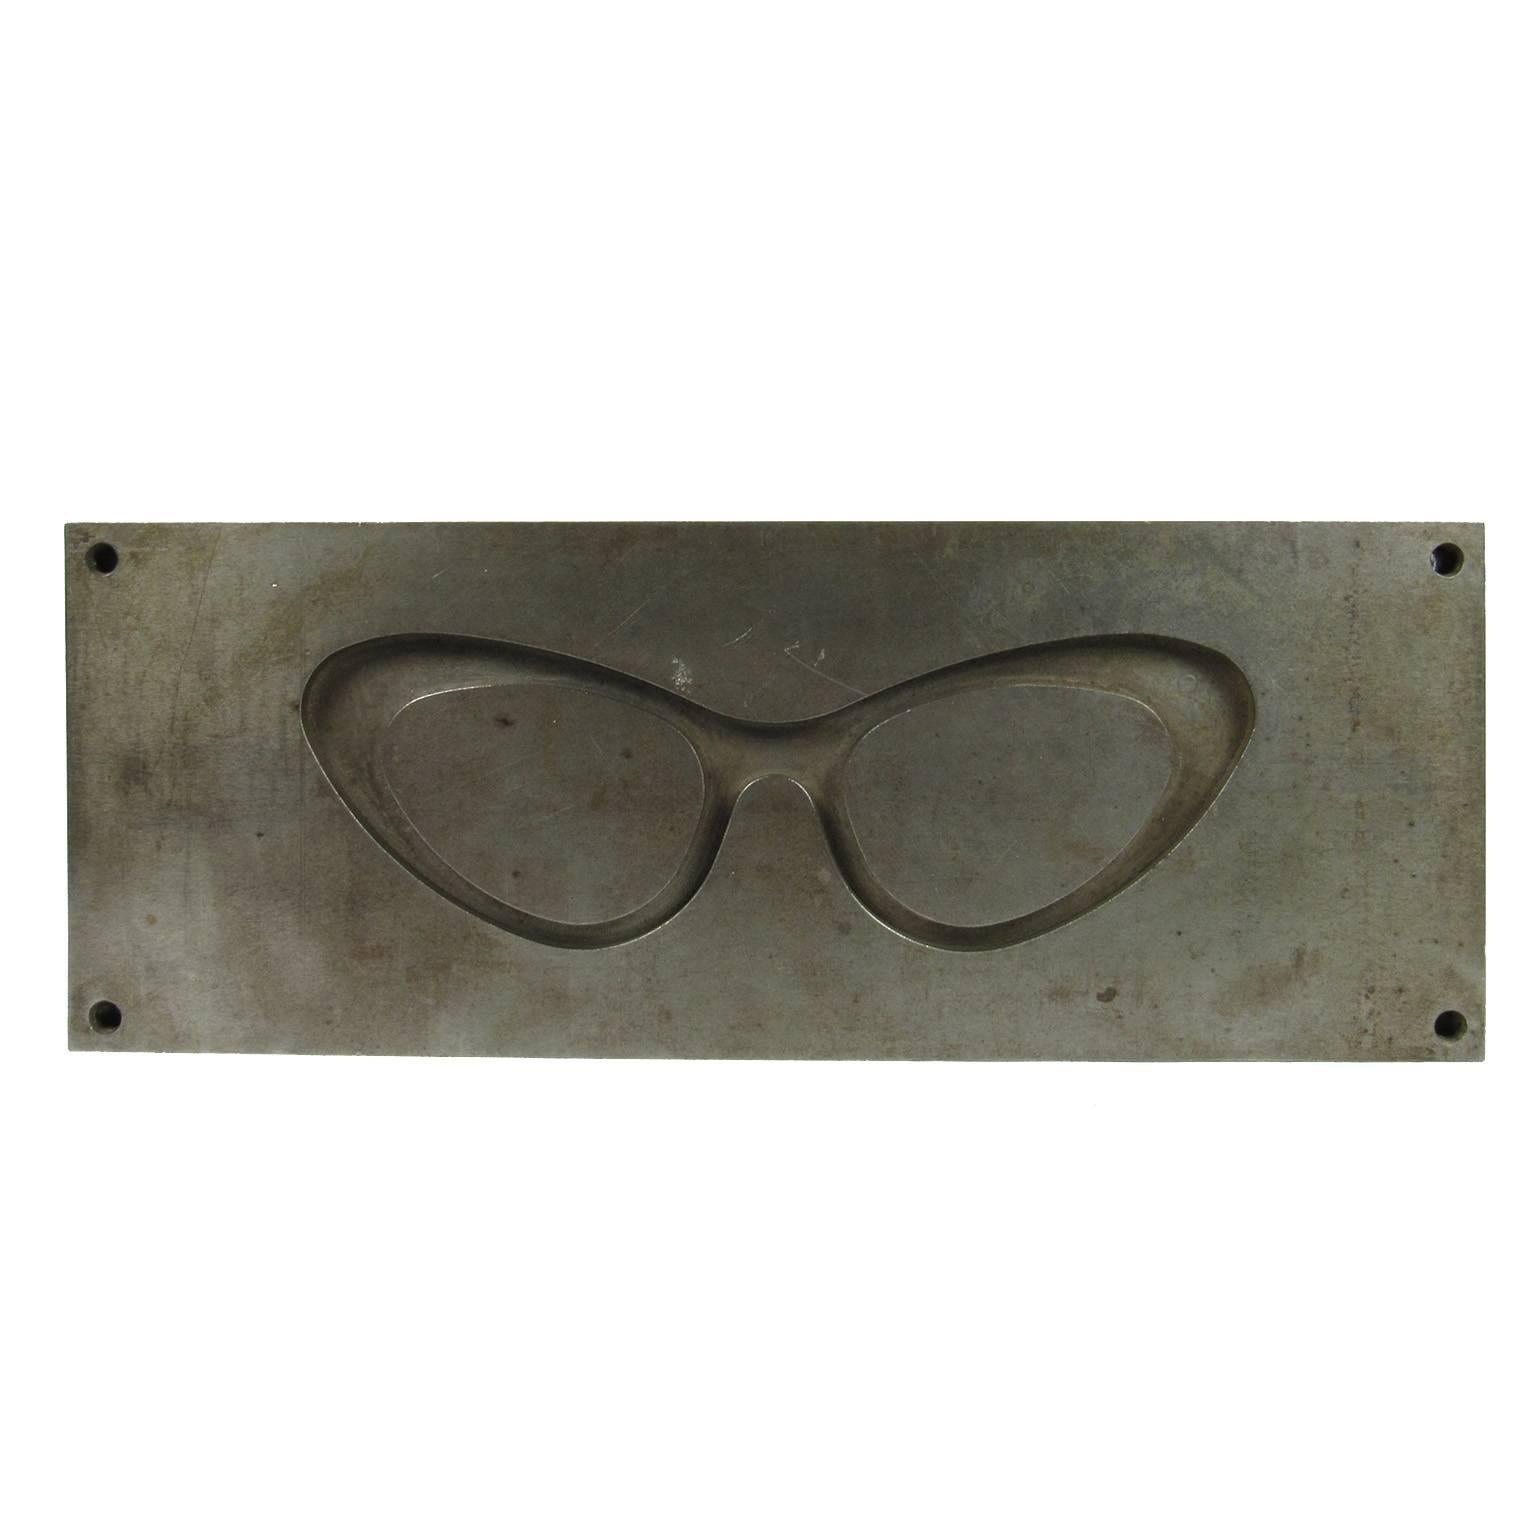 Midcentury Unique Industrial Steel Oversized “Cat’s Eye” Glasses Mold For Sale